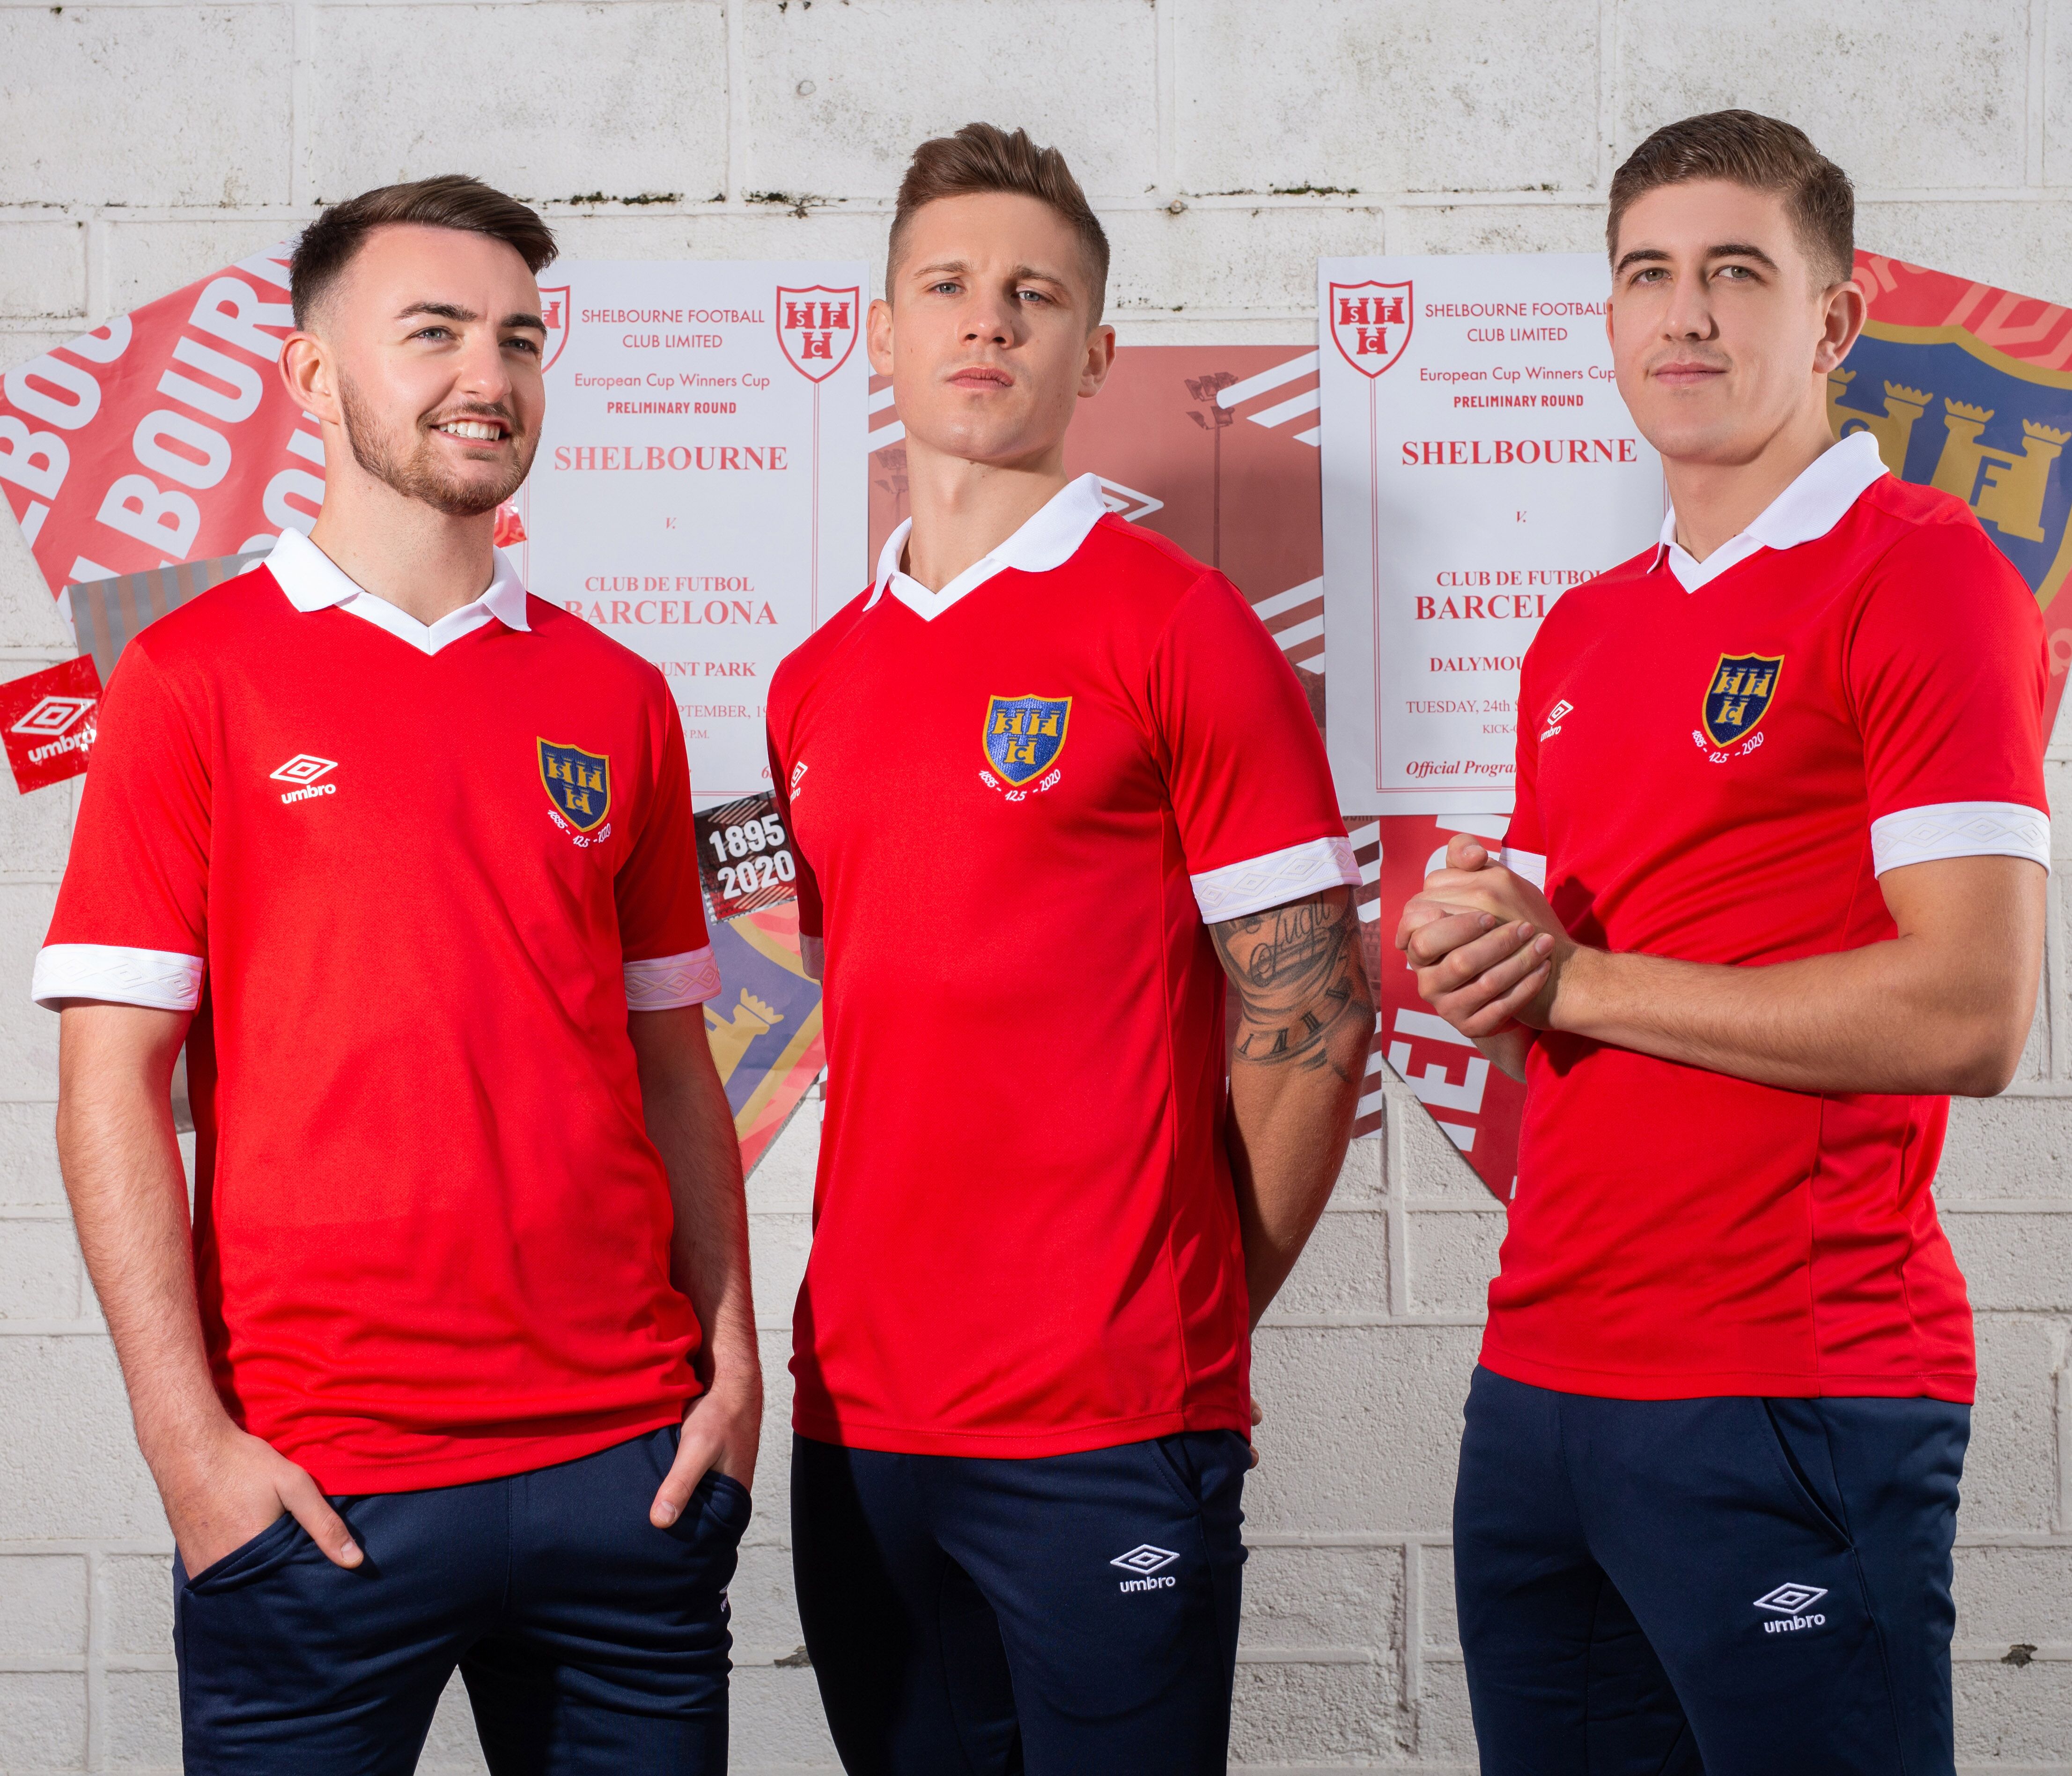 Online service launched for Shels Club Shop